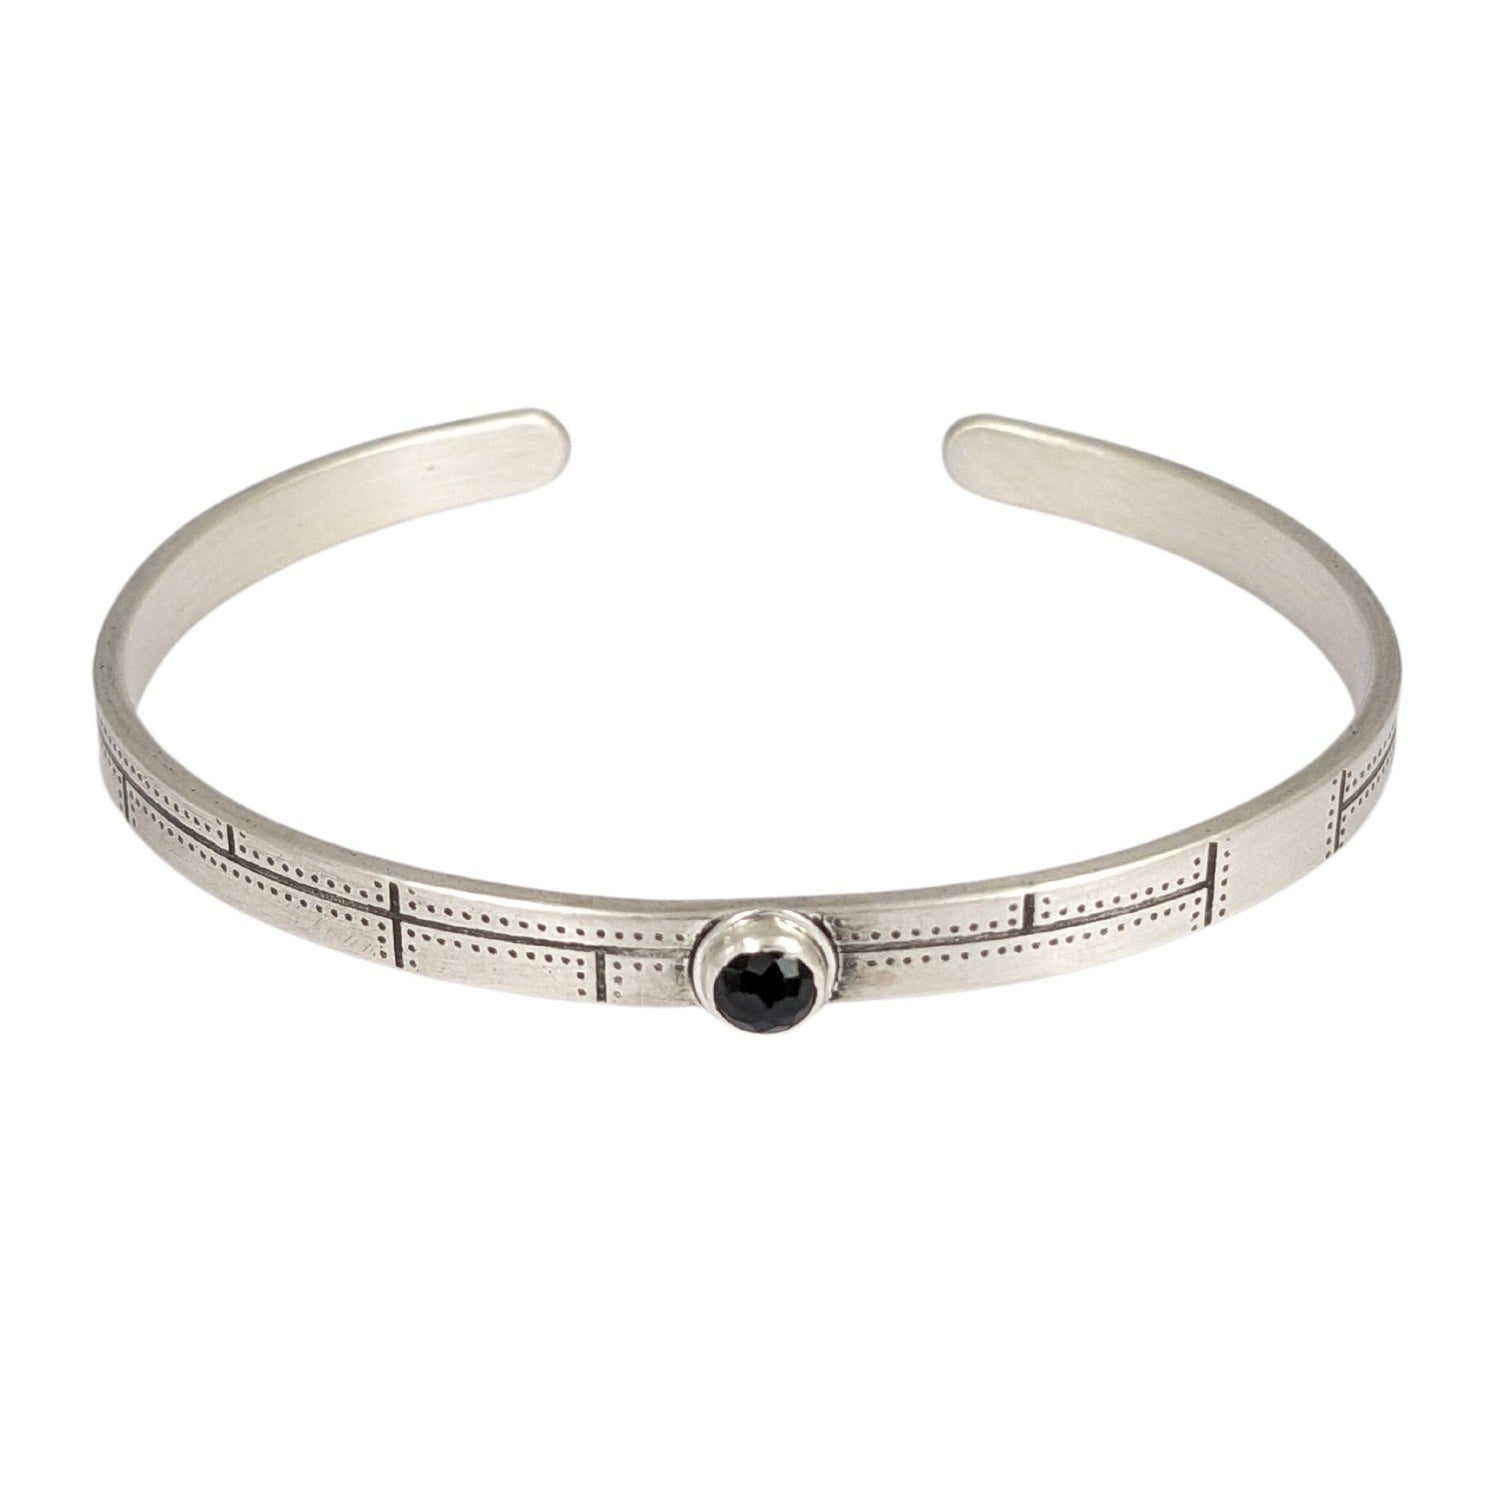 Narrow sterling silver cuff bracelet. The bracelet has a riveted panel design and features a rose cut black spinel gemstone.